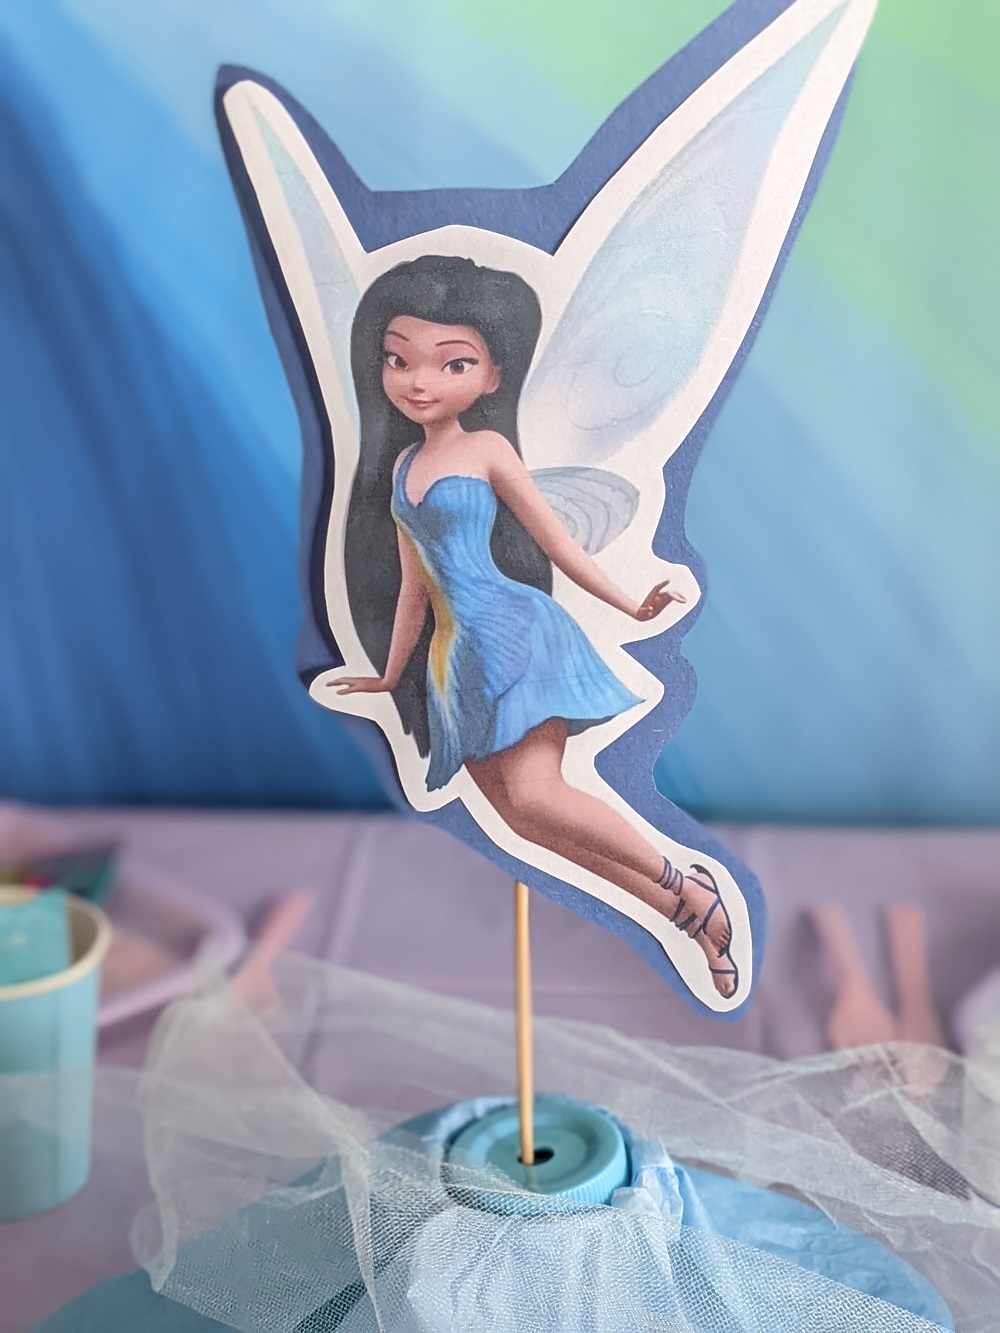 Easy & Inexpensive Ideas for Hosting an EPIC Party with the Fairies